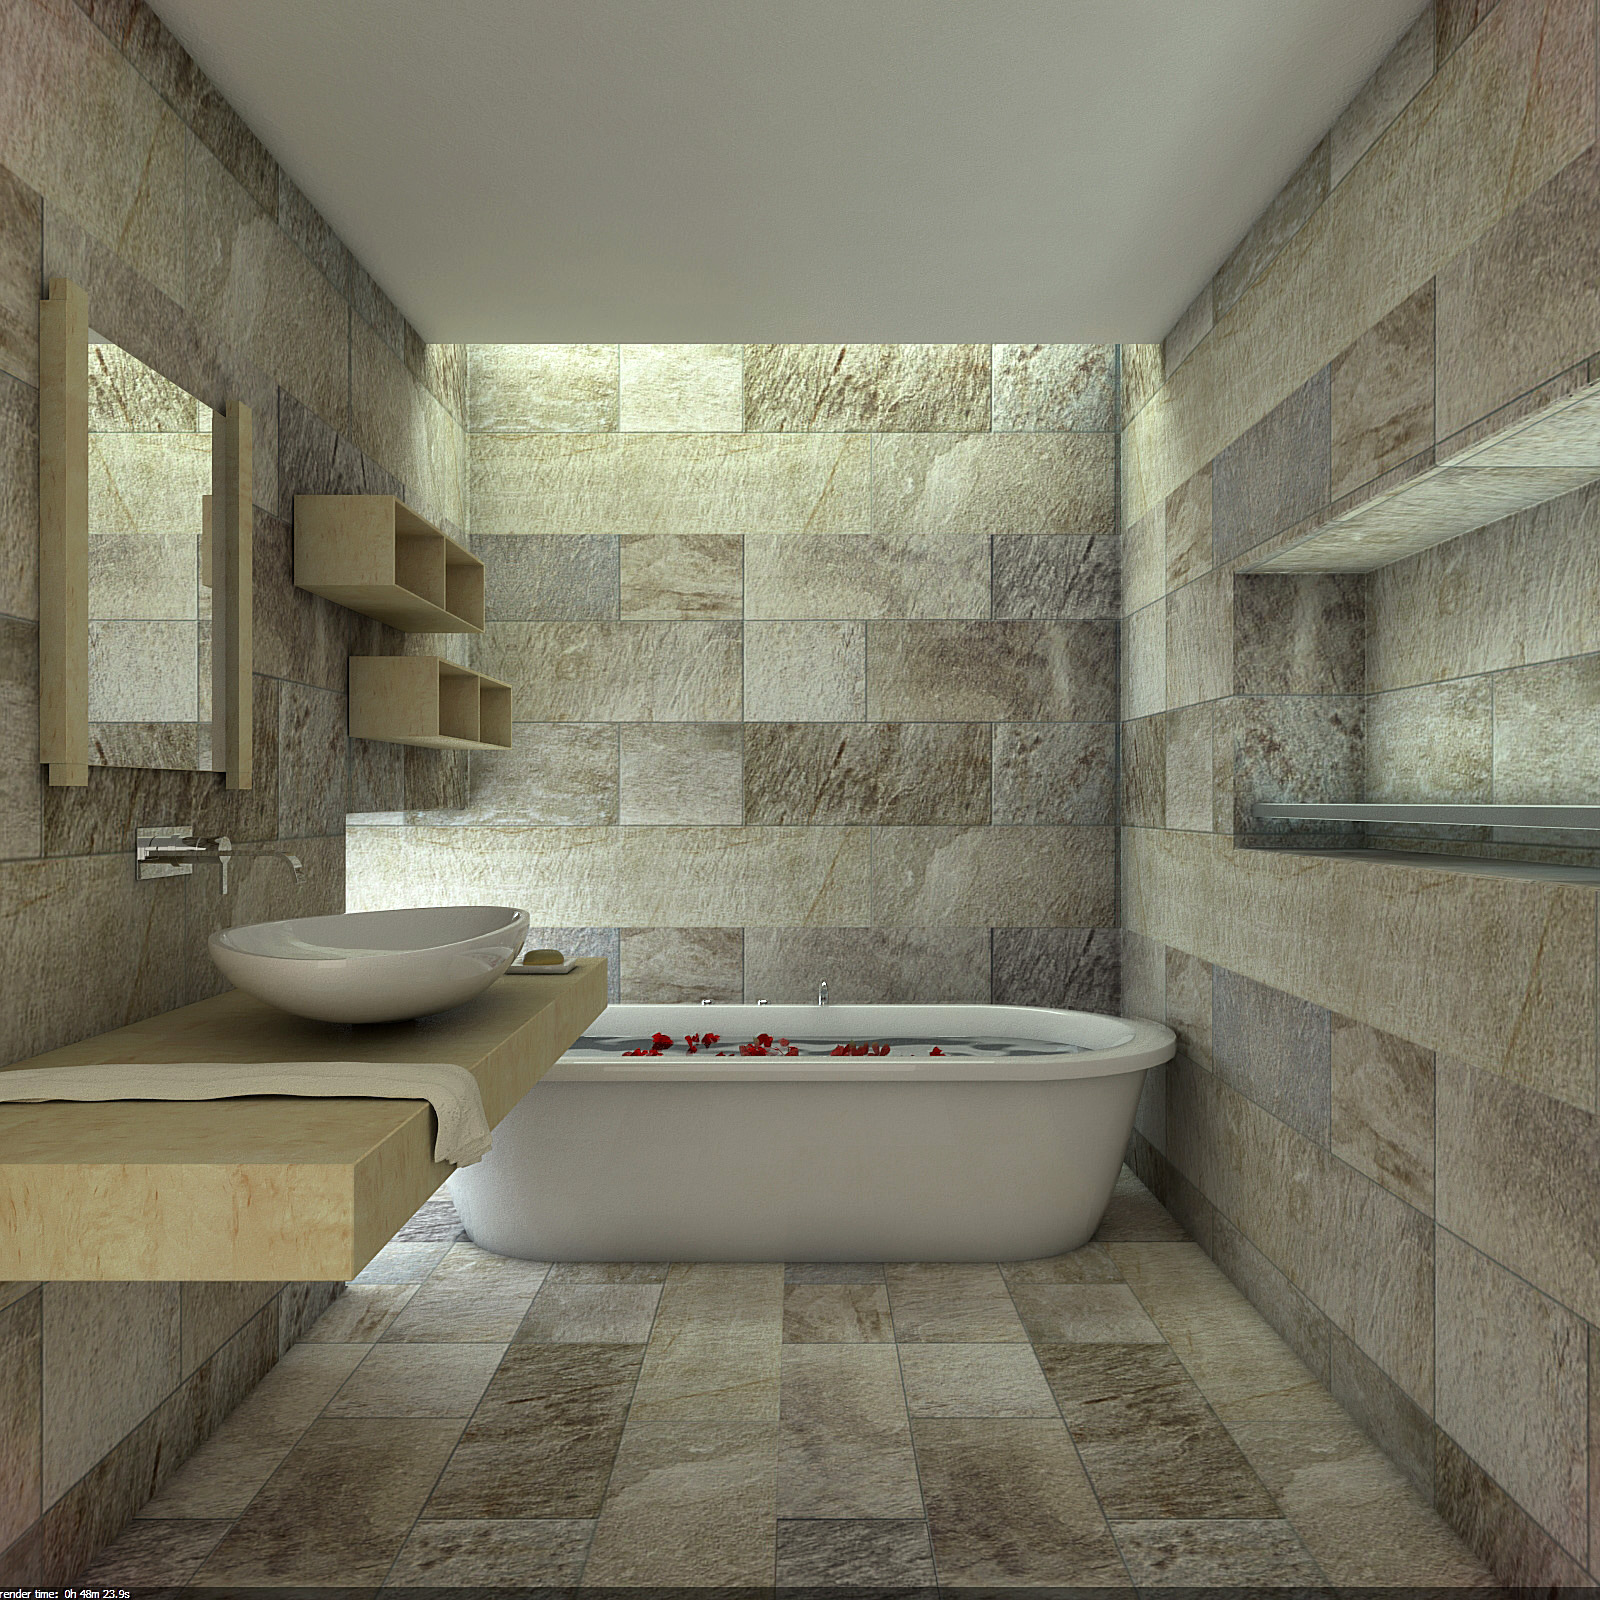 Bathrooms, Works in stone